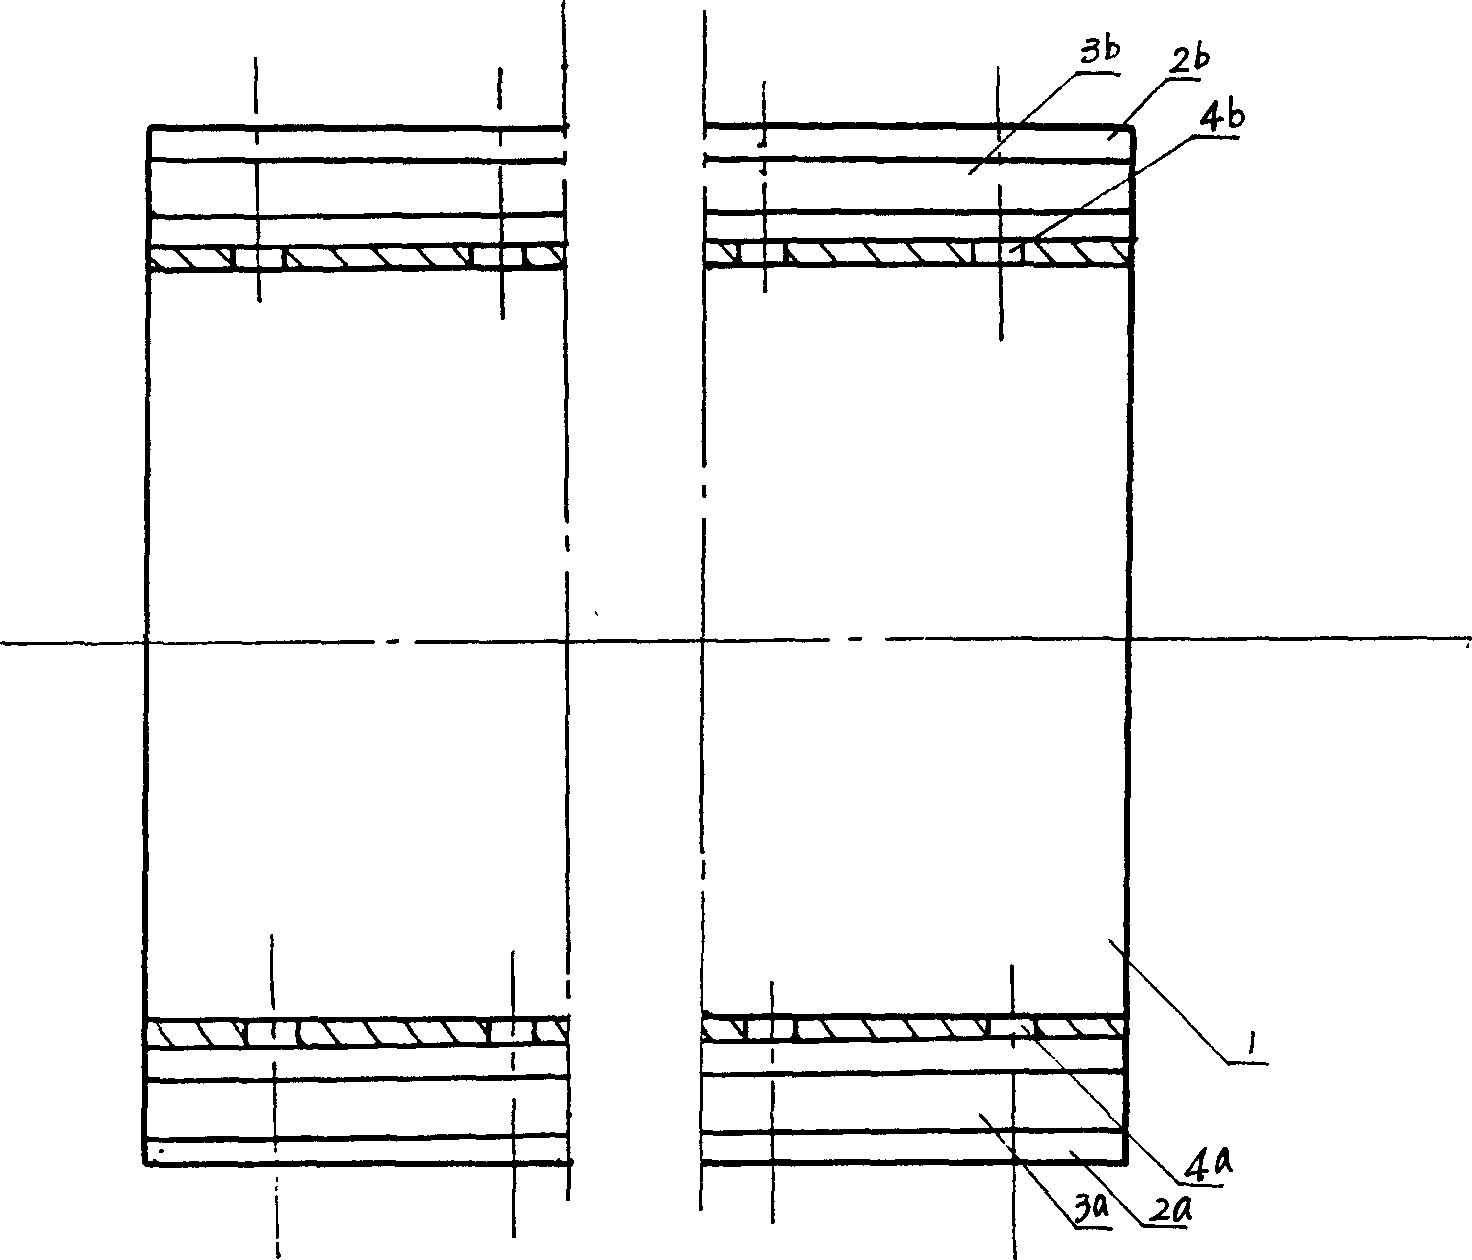 Novel conduit and multifunctional water-saving irrigation device containing the conduit